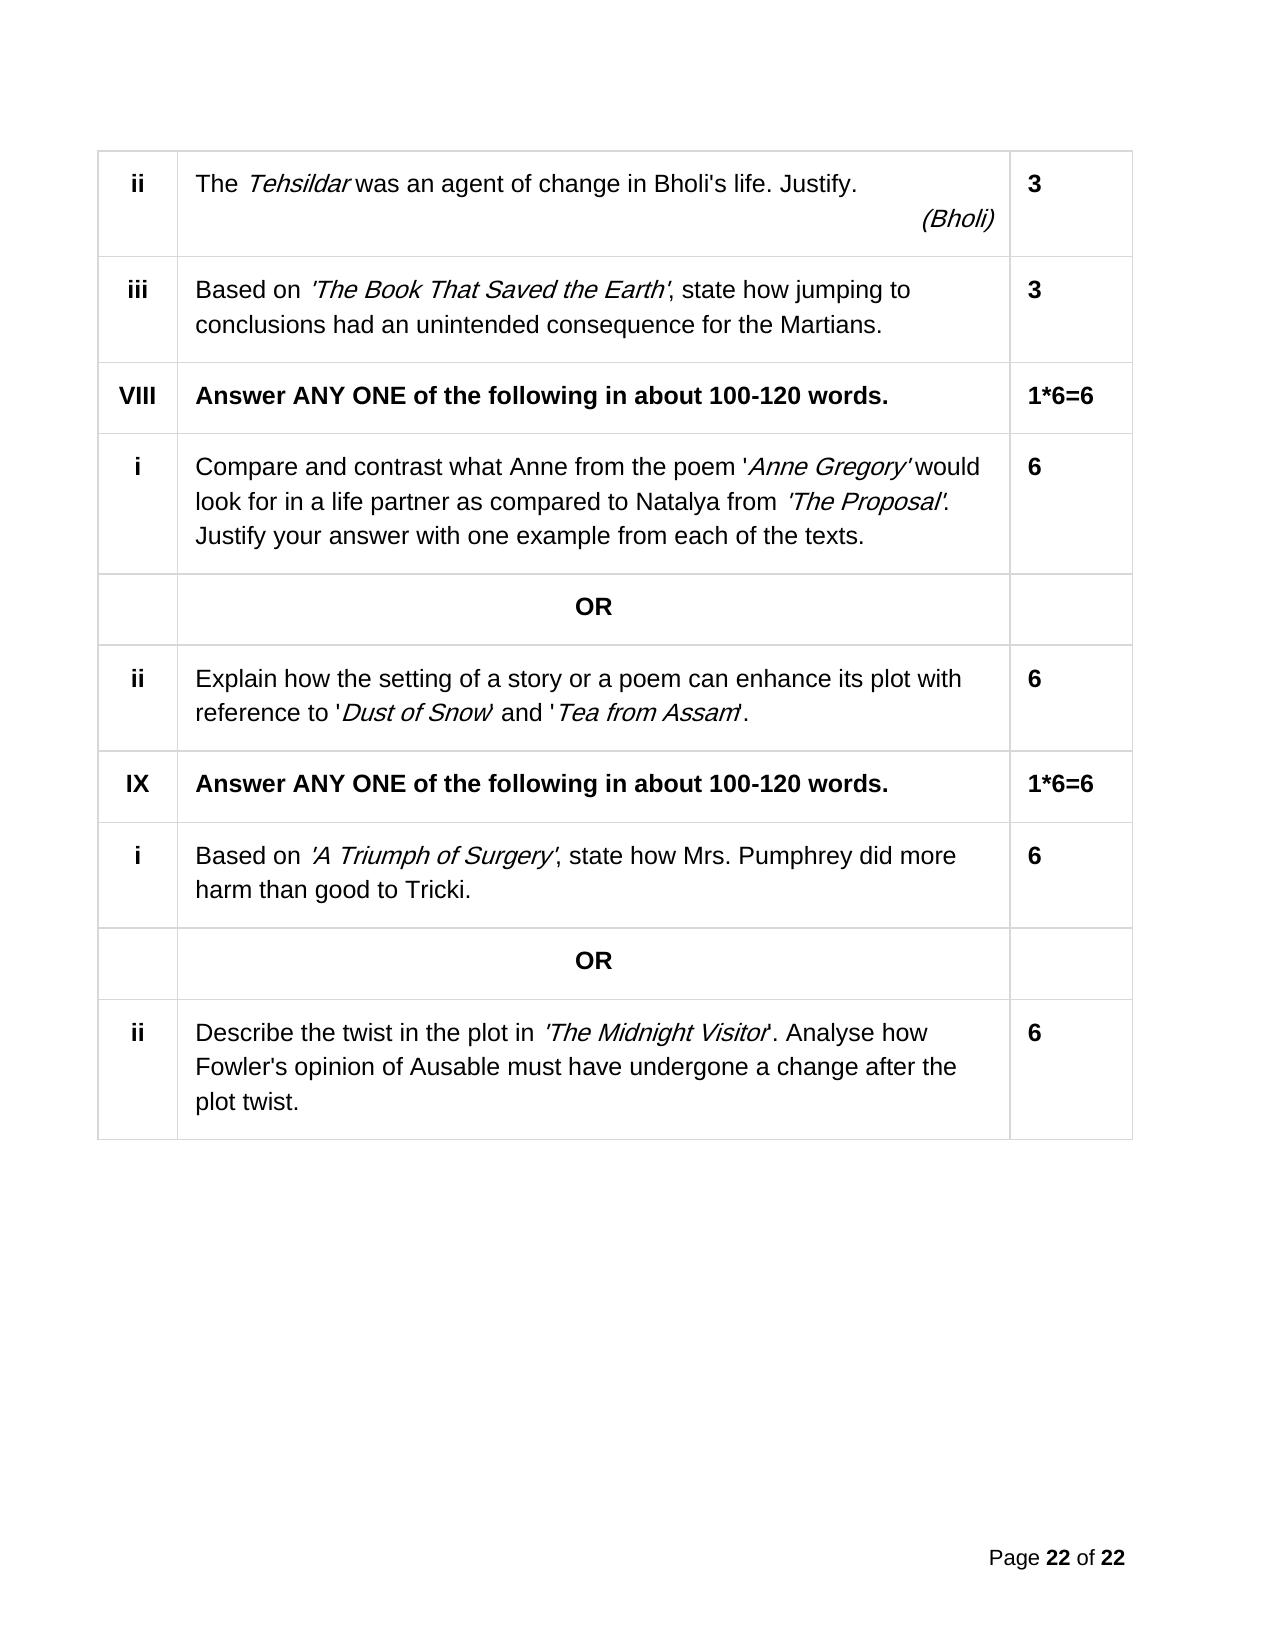 CBSE Class 10 English Practice Questions 2022-23 - Page 22